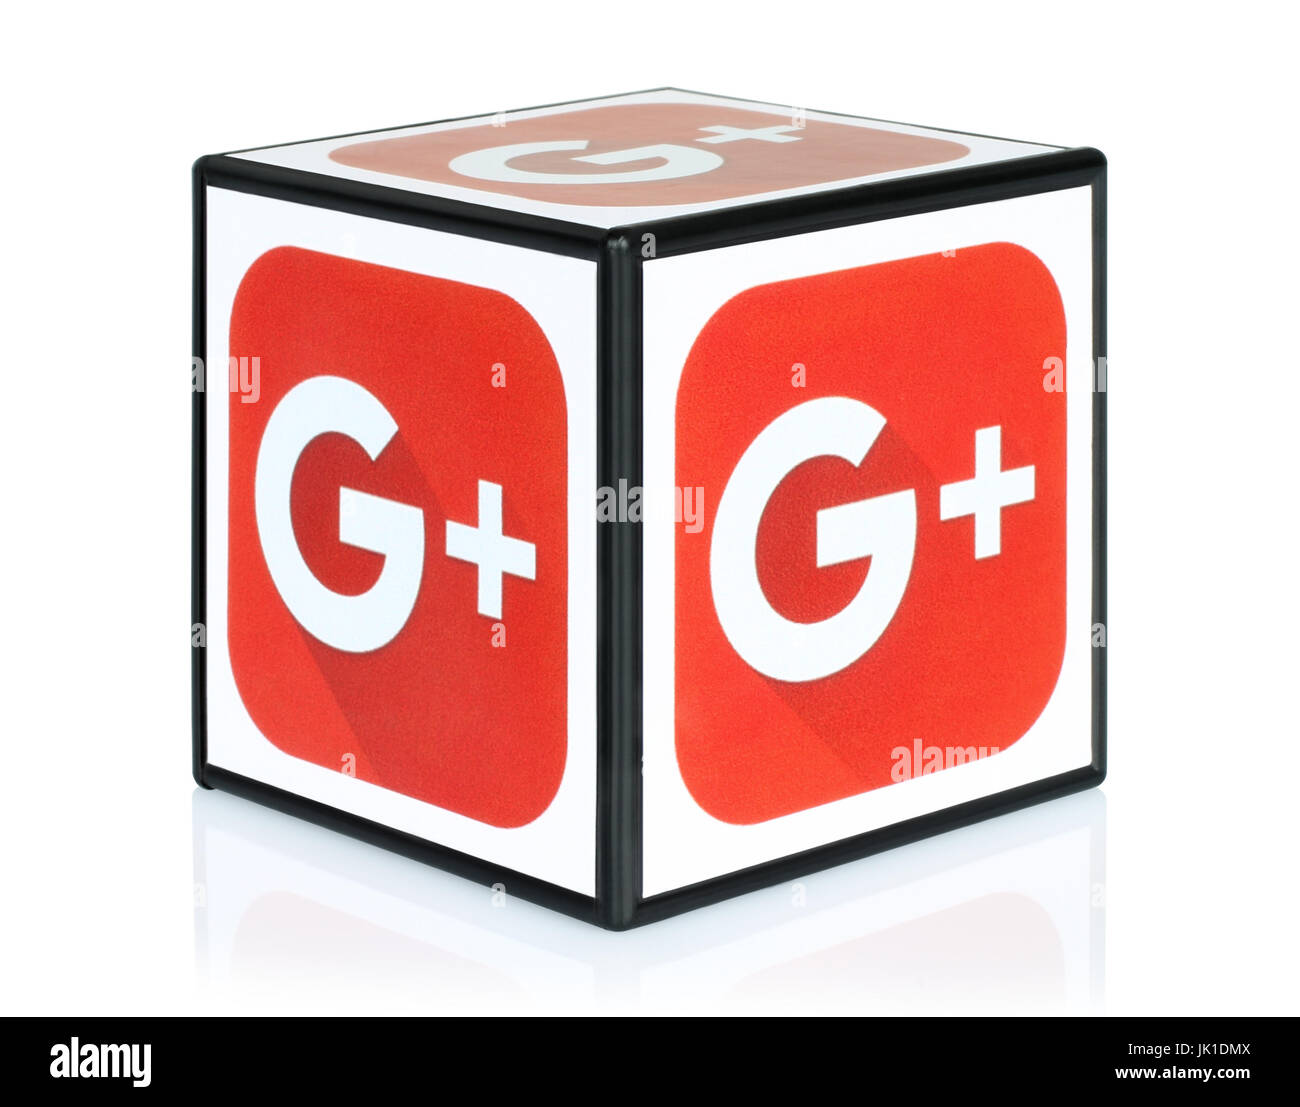 Kiev, Ukraine - September 30, 2015: Cube with Google Plus icons printed on paper. Google Plus is a well-known social networking and news service Stock Photo